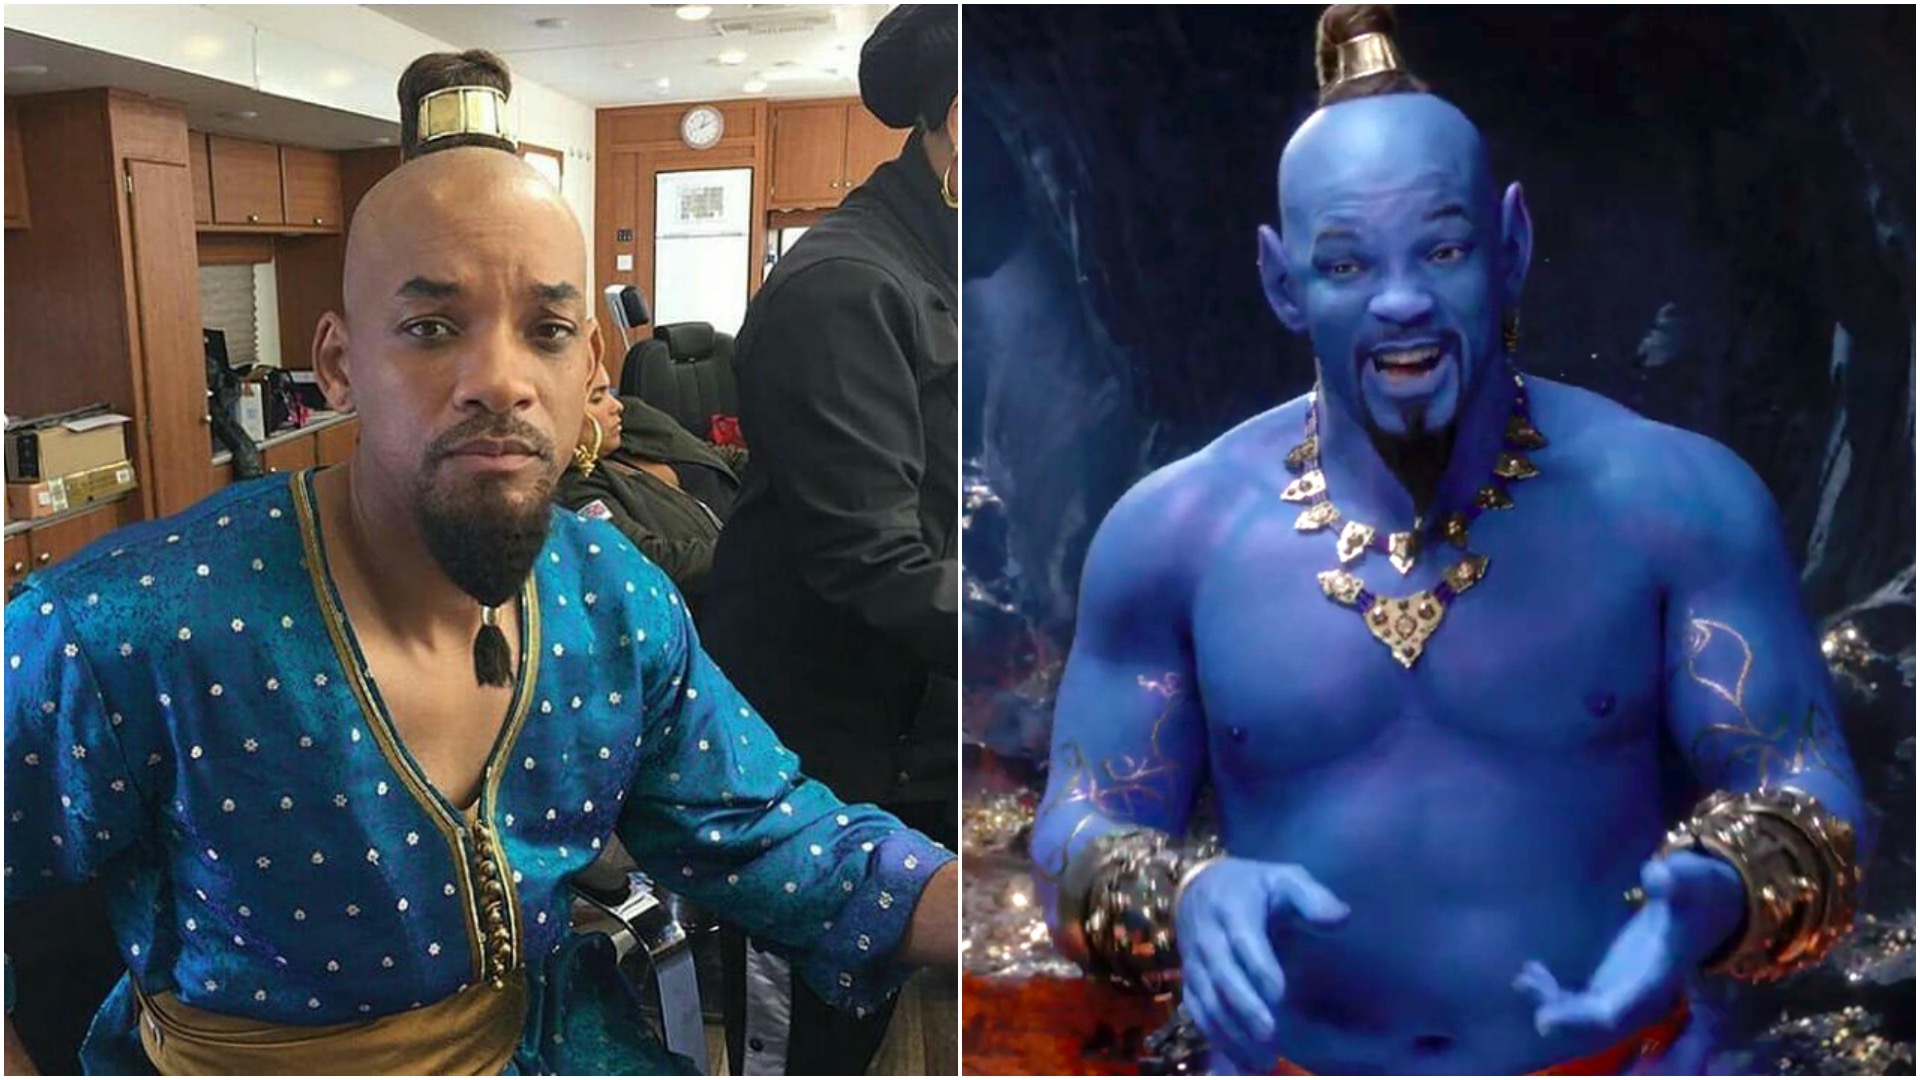 New Live-Action Aladdin Trailer Reveals Blue Will Smith Genie. This is Real. | Geek ...1920 x 1080